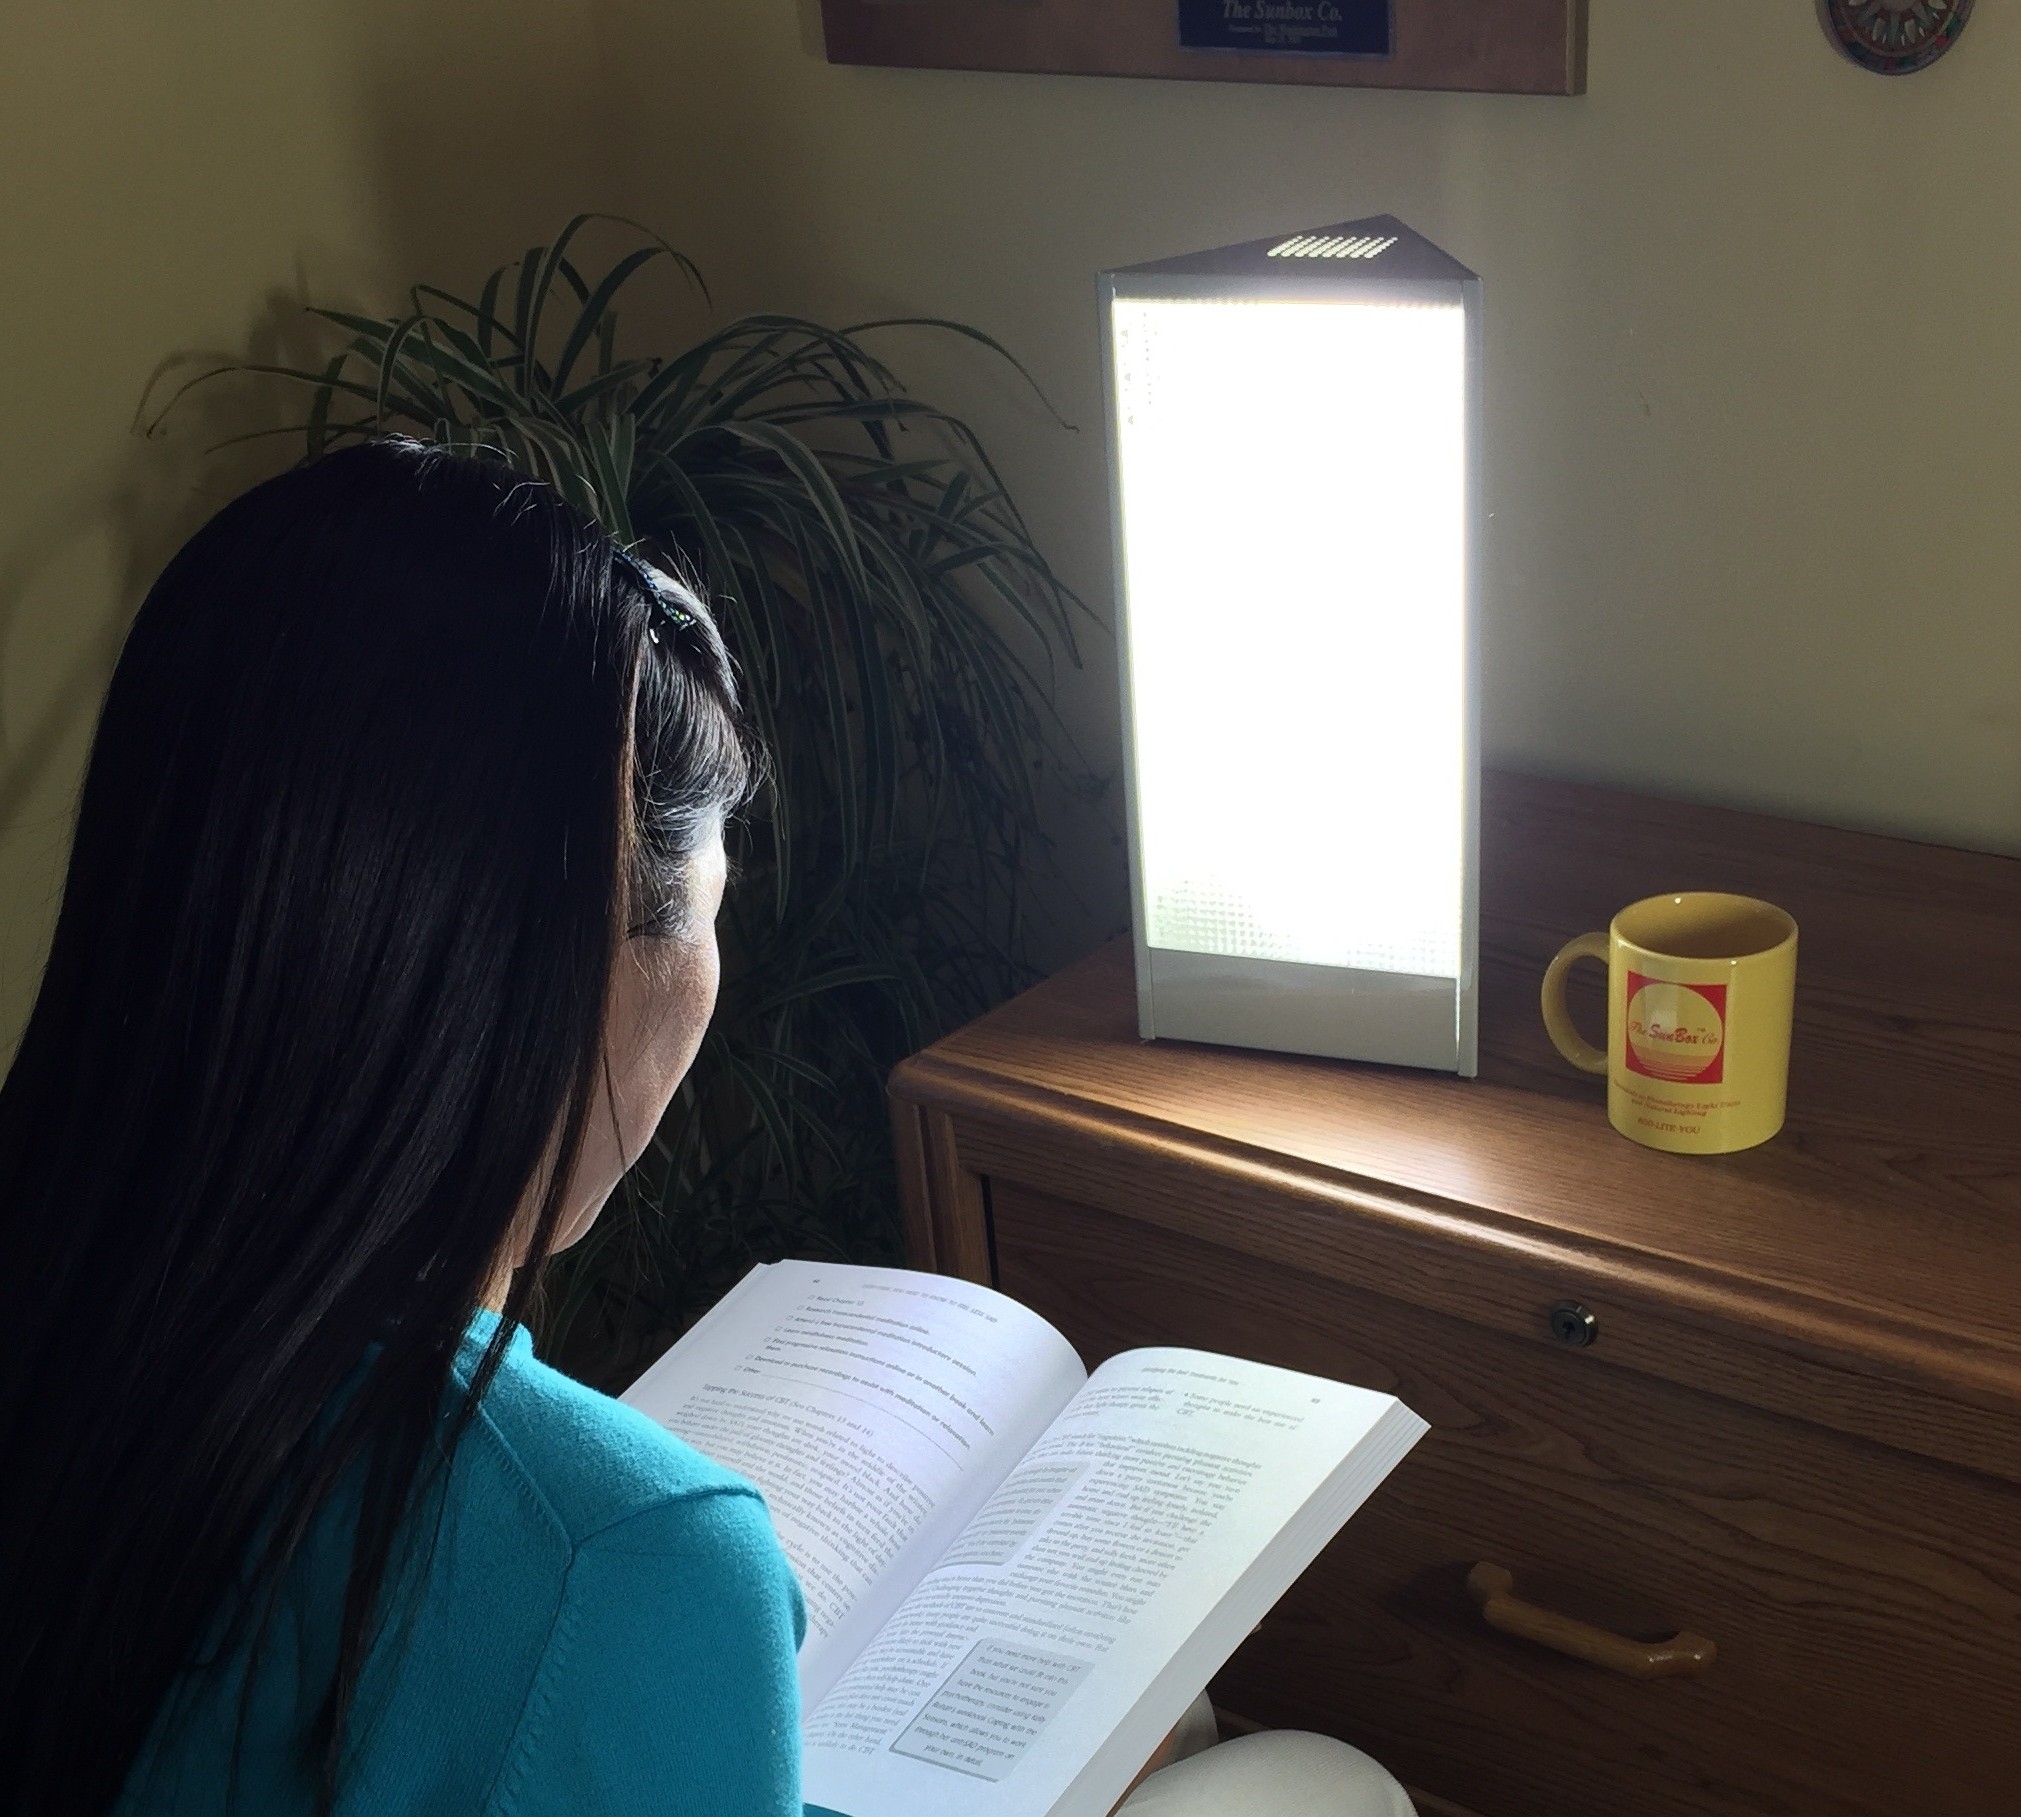 afstemning Ved daggry Slovenien SunLight Jr- Bright Light Therapy Lamp - The SunBox Company